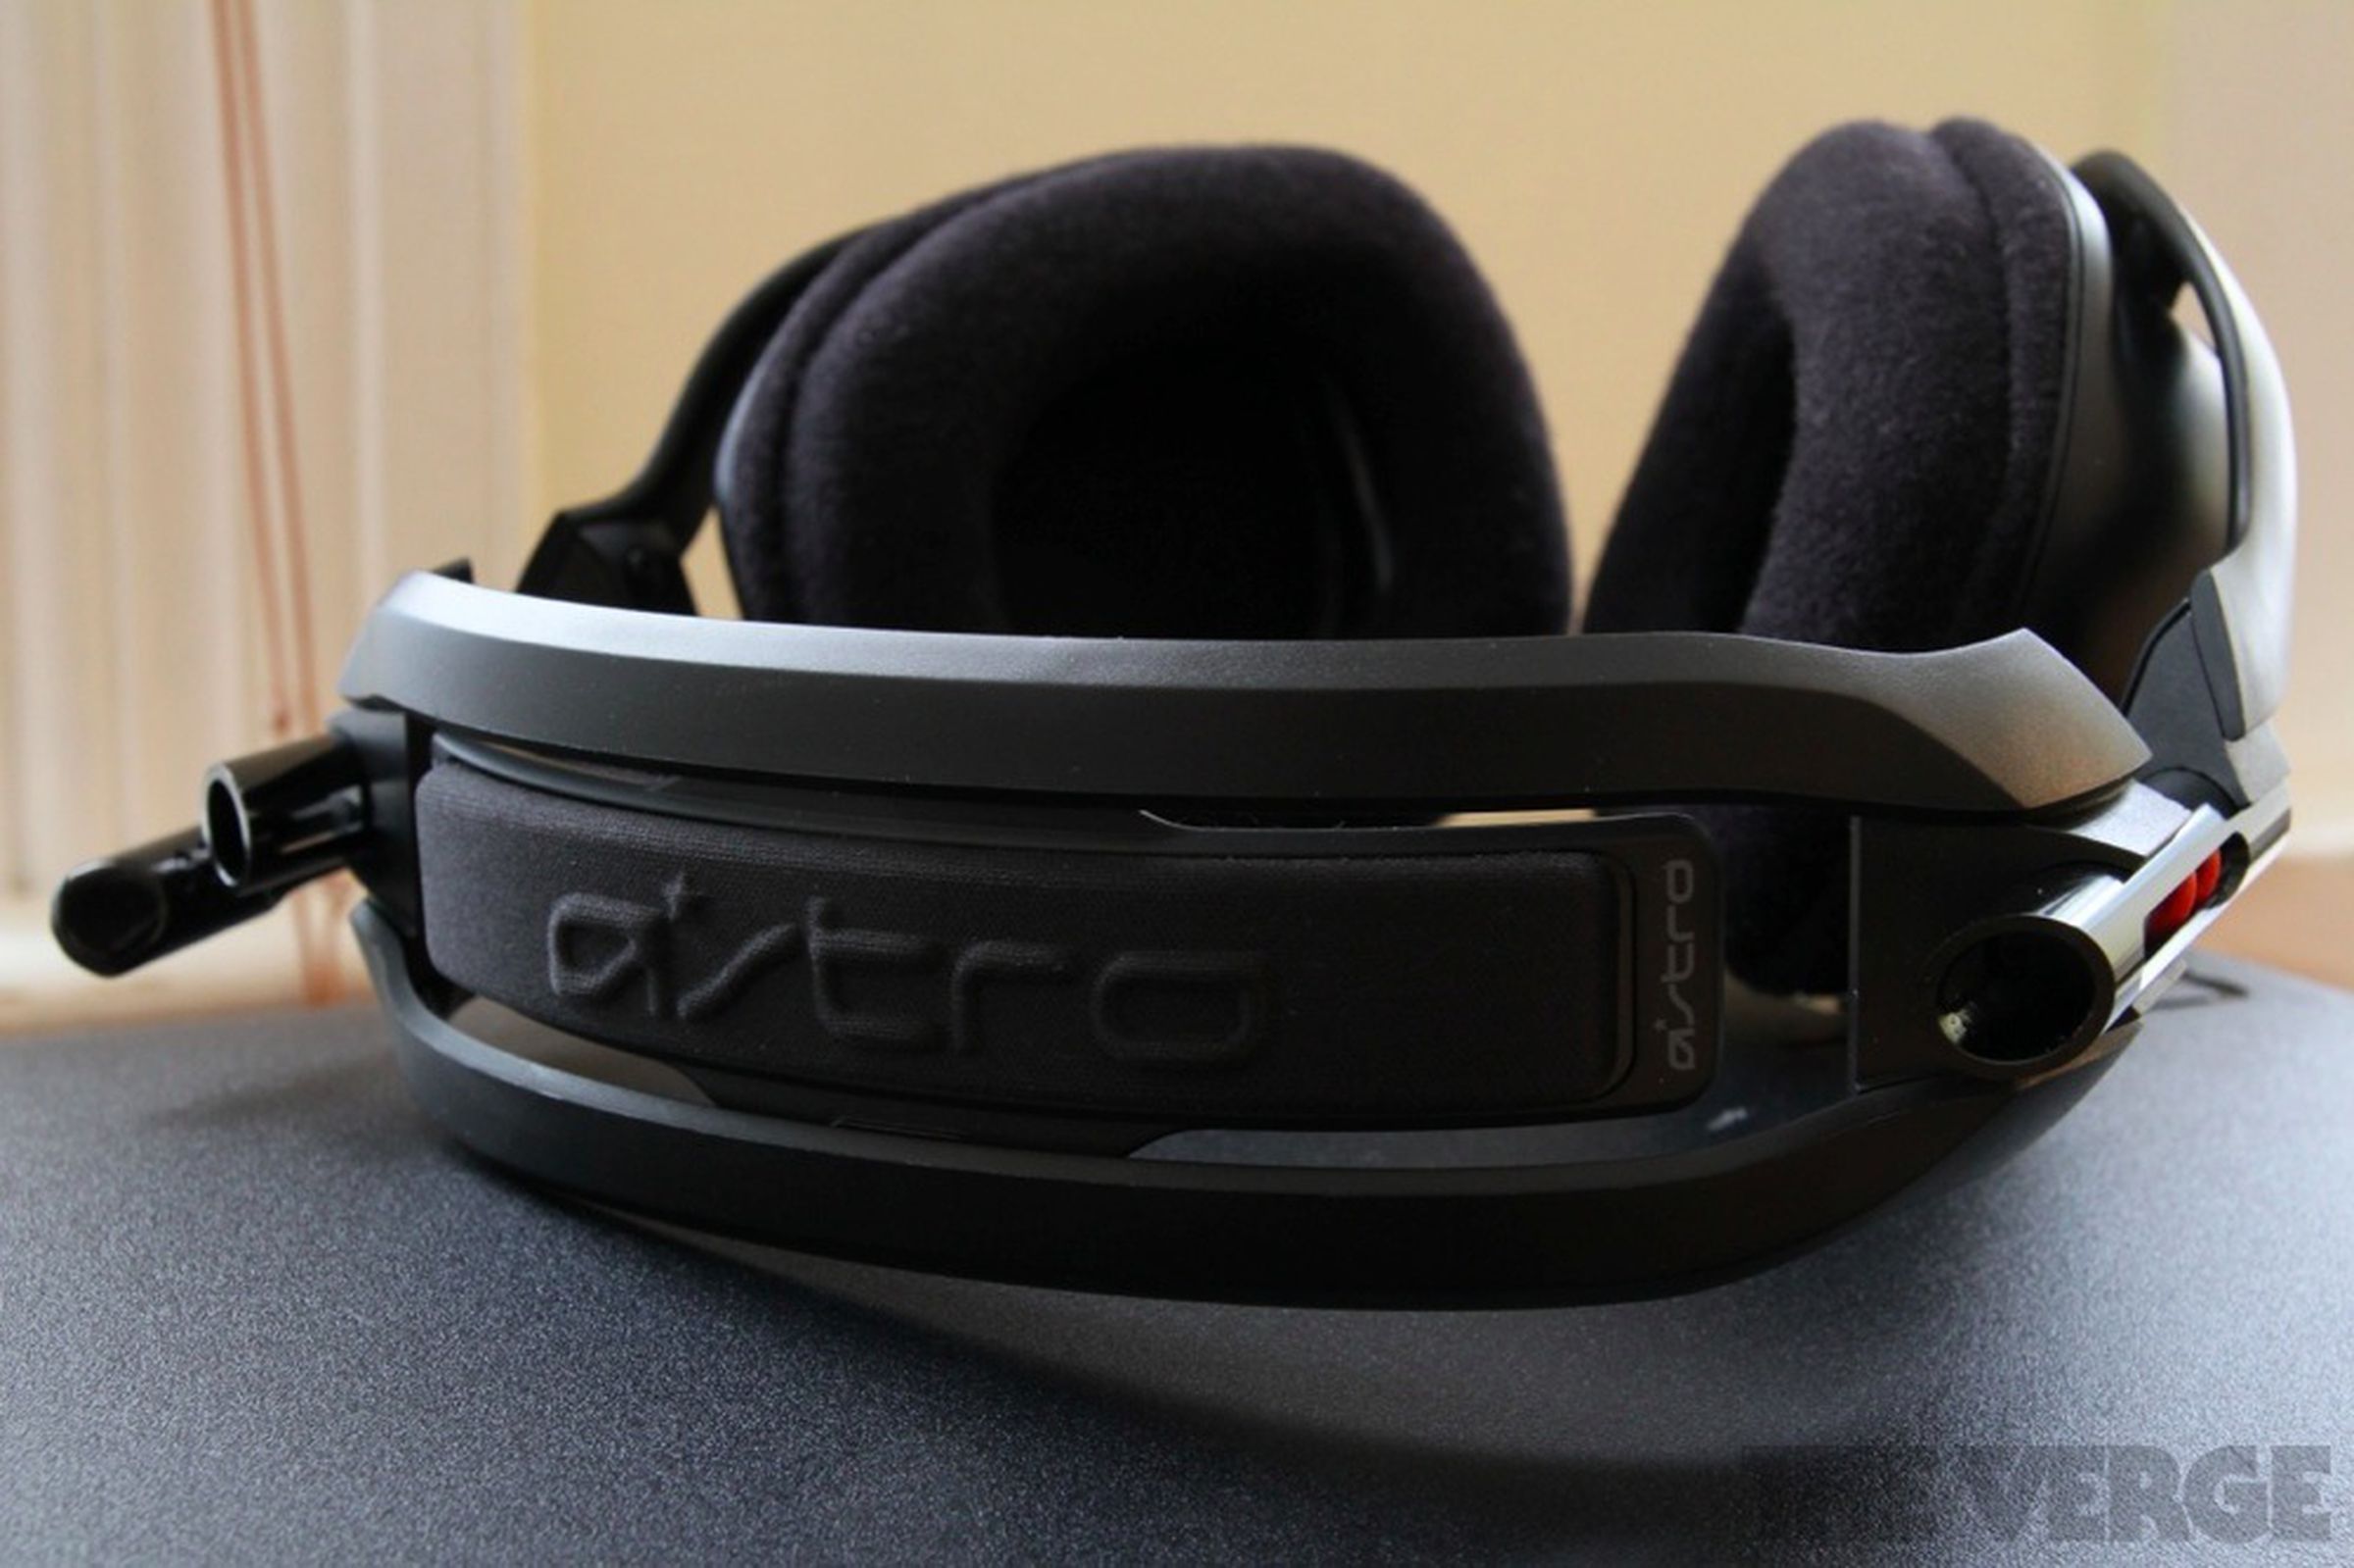 Astro A50 wireless gaming headset photos